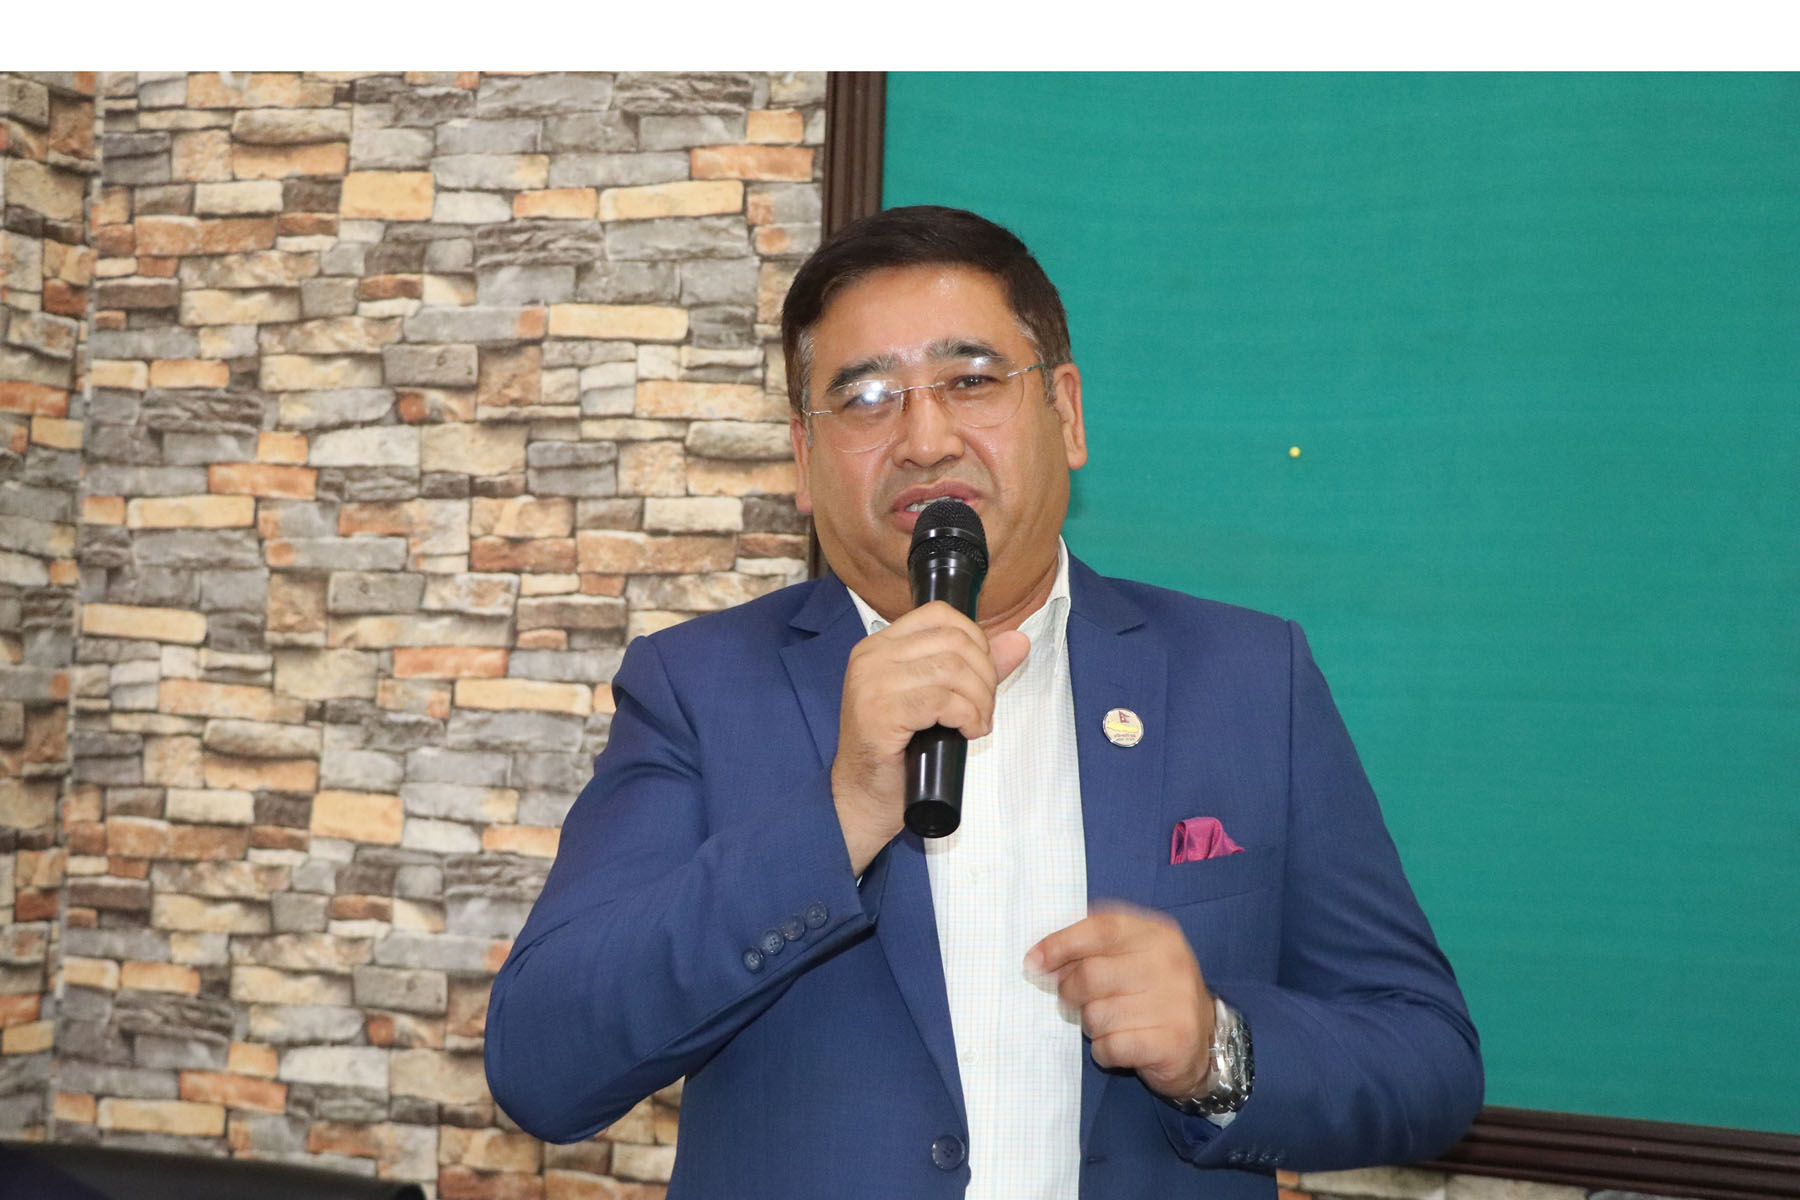 Bharatpur Airport expansion to start soon: Tourism Minister Shrestha